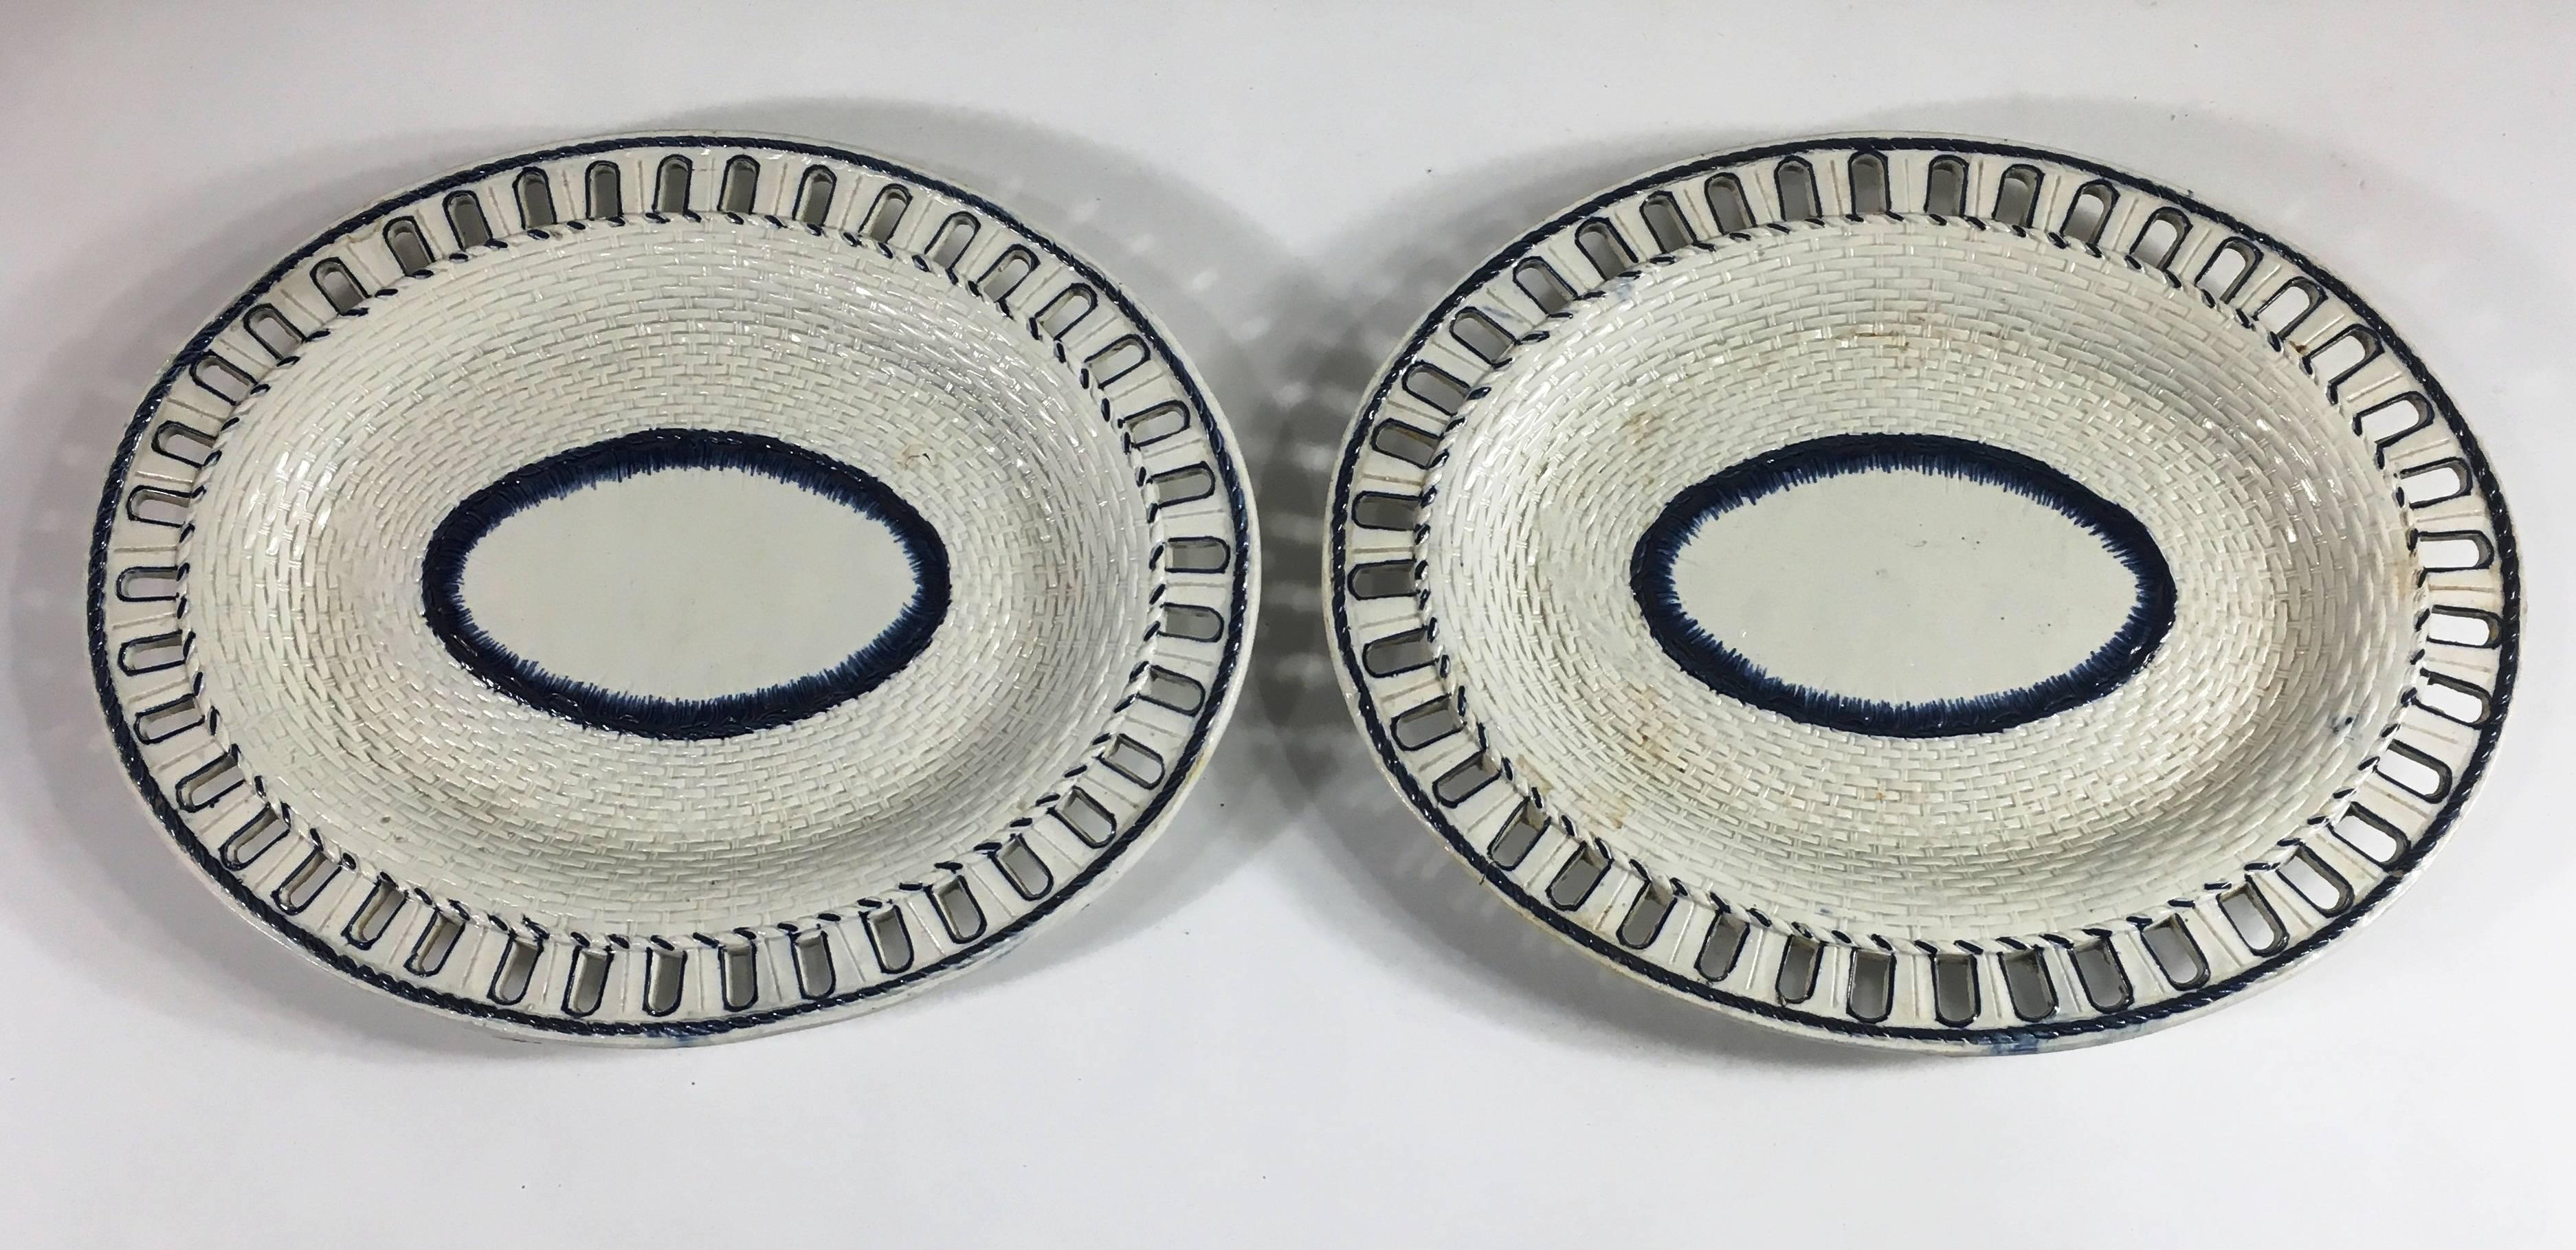 A nice pair of Leeds blue and white feather-ware oval under-plates with a basket weave texture and a reticulated border, circa 1850. Signed 